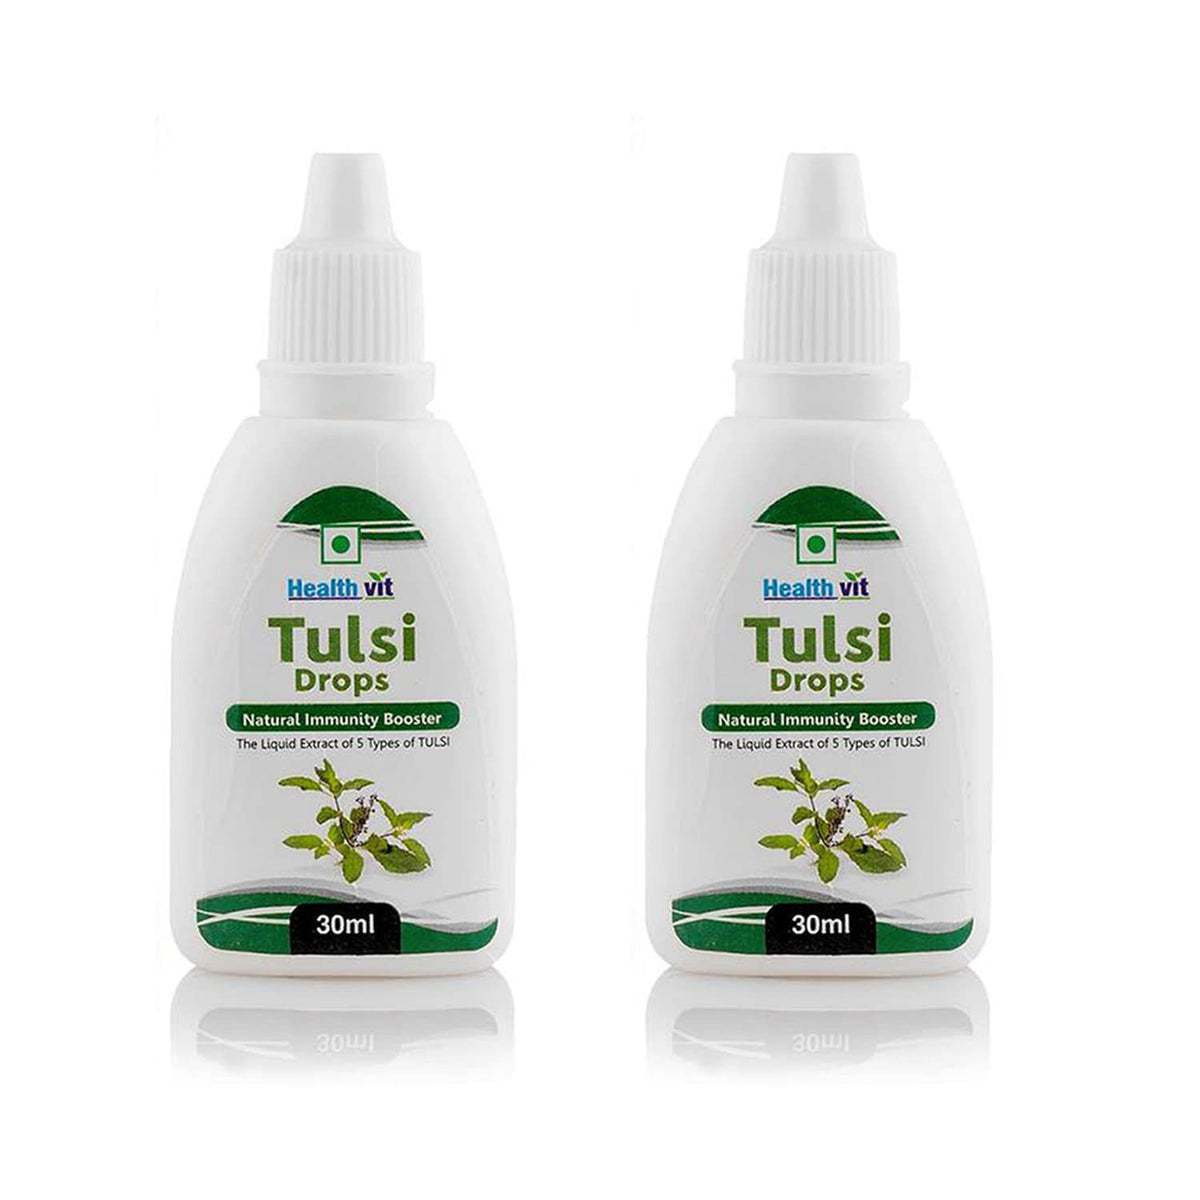 Healthvit Tulsi Drops- Concentrated Extract of 5 Rare Tulsi for Natural Immunity Boosting & Cough and Cold Relief 30ml (Pack of 2)